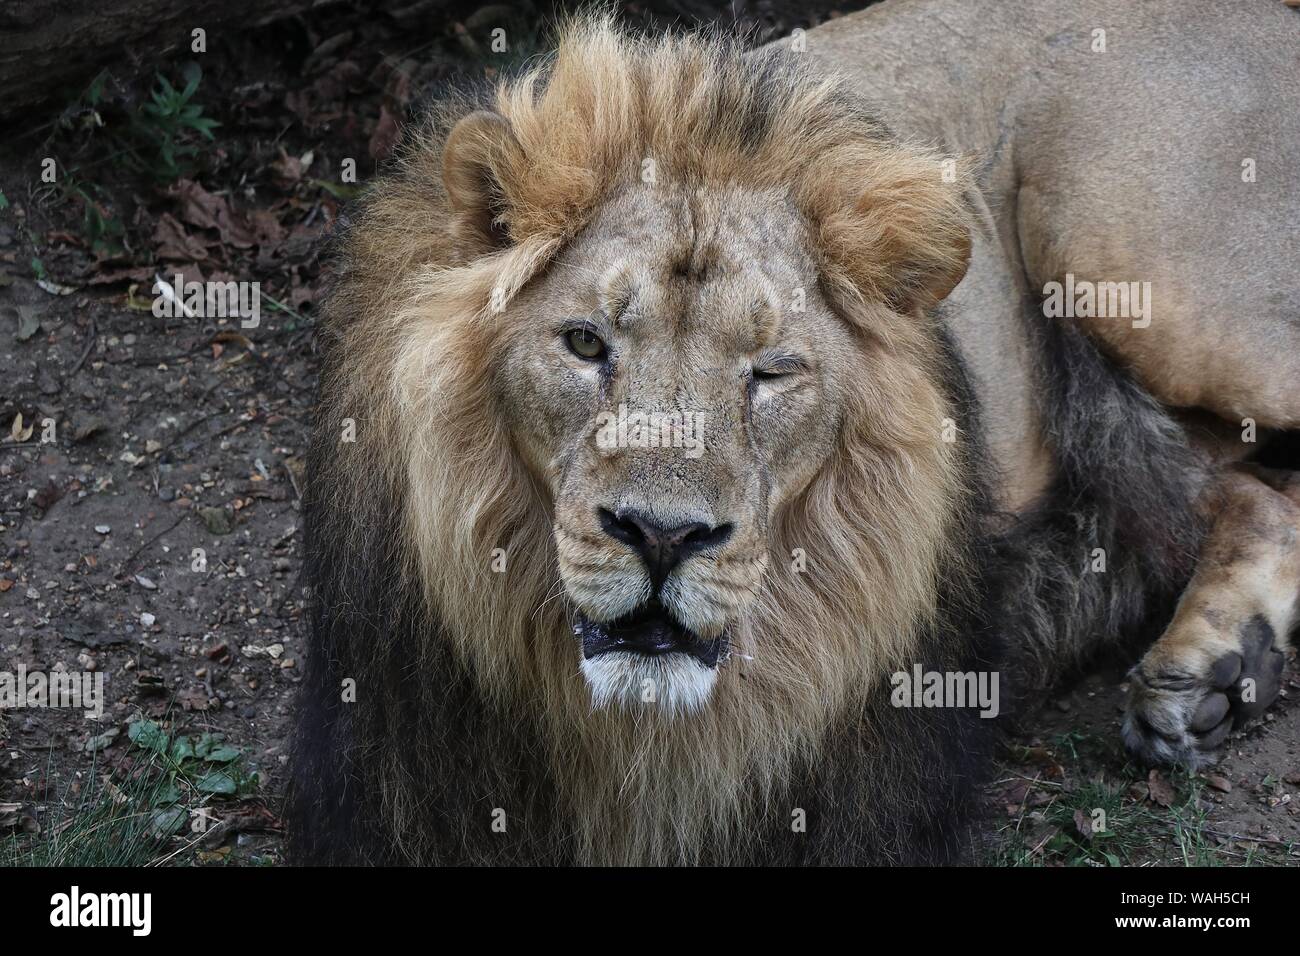 ZSL London Zoo's big cats Asiatic lions given giant seesaw to celebrate World Lion Day 7 August 2019  London UK Stock Photo